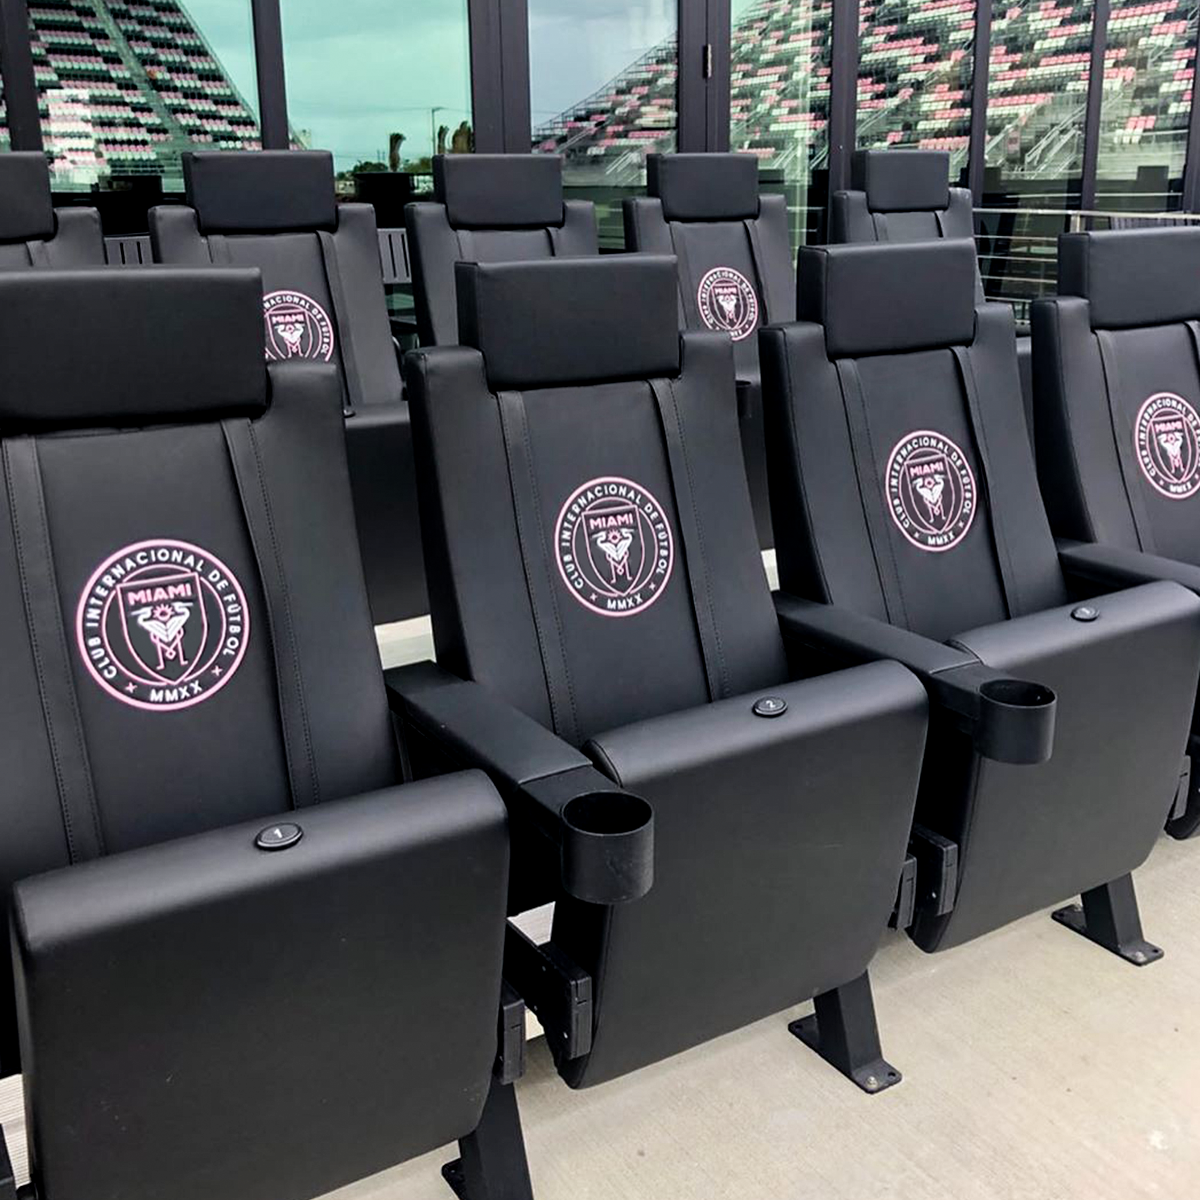 SuiteMax 3.5 VIP Seats with Boston Red Sox Champs 2013 Logo